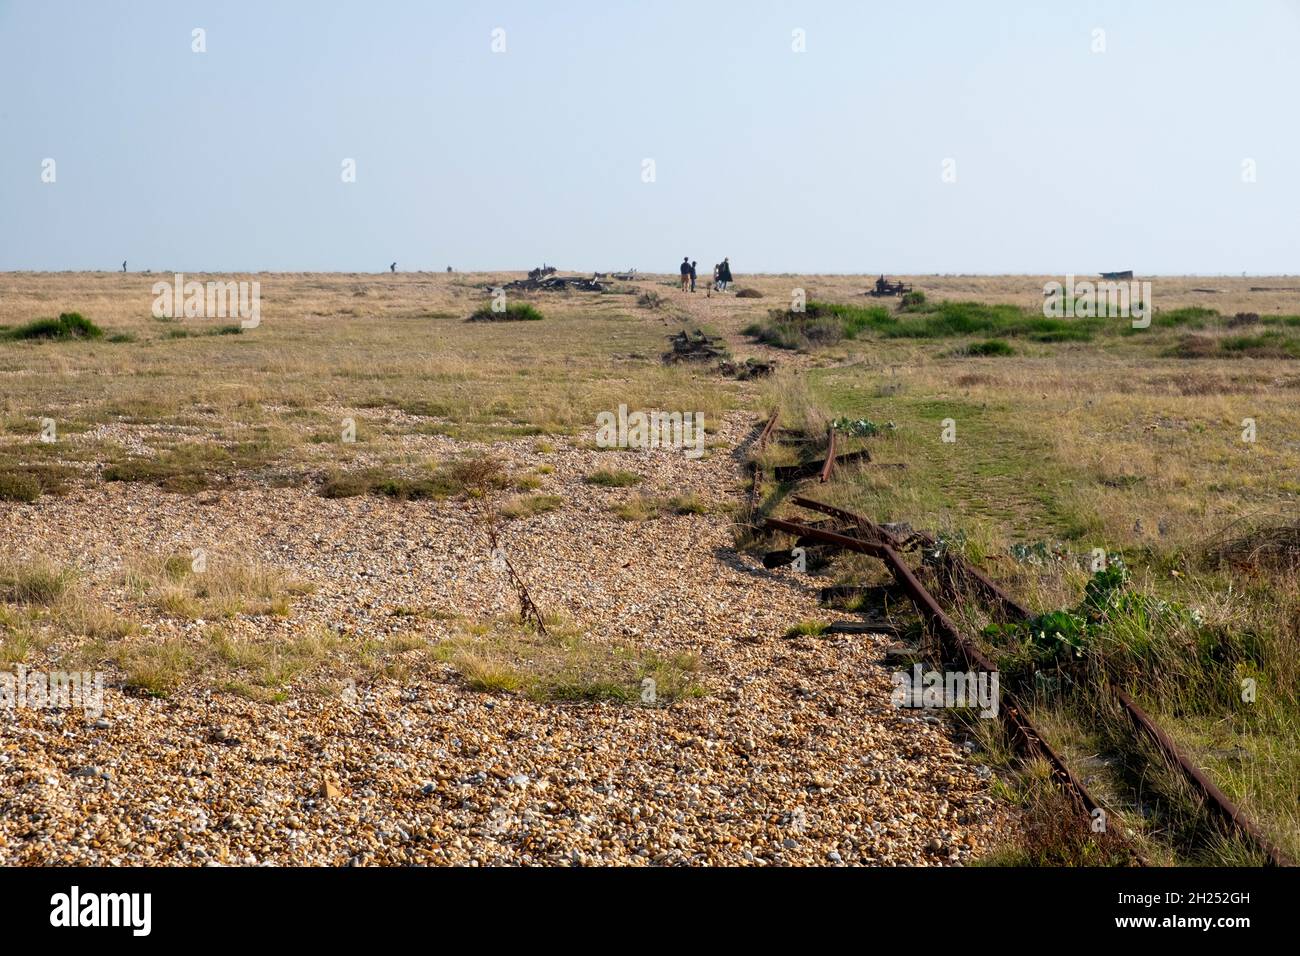 People walking on the Dungeness Estate arid desert landscape on the Kent coast near East Sussex in autumn Stock Photo